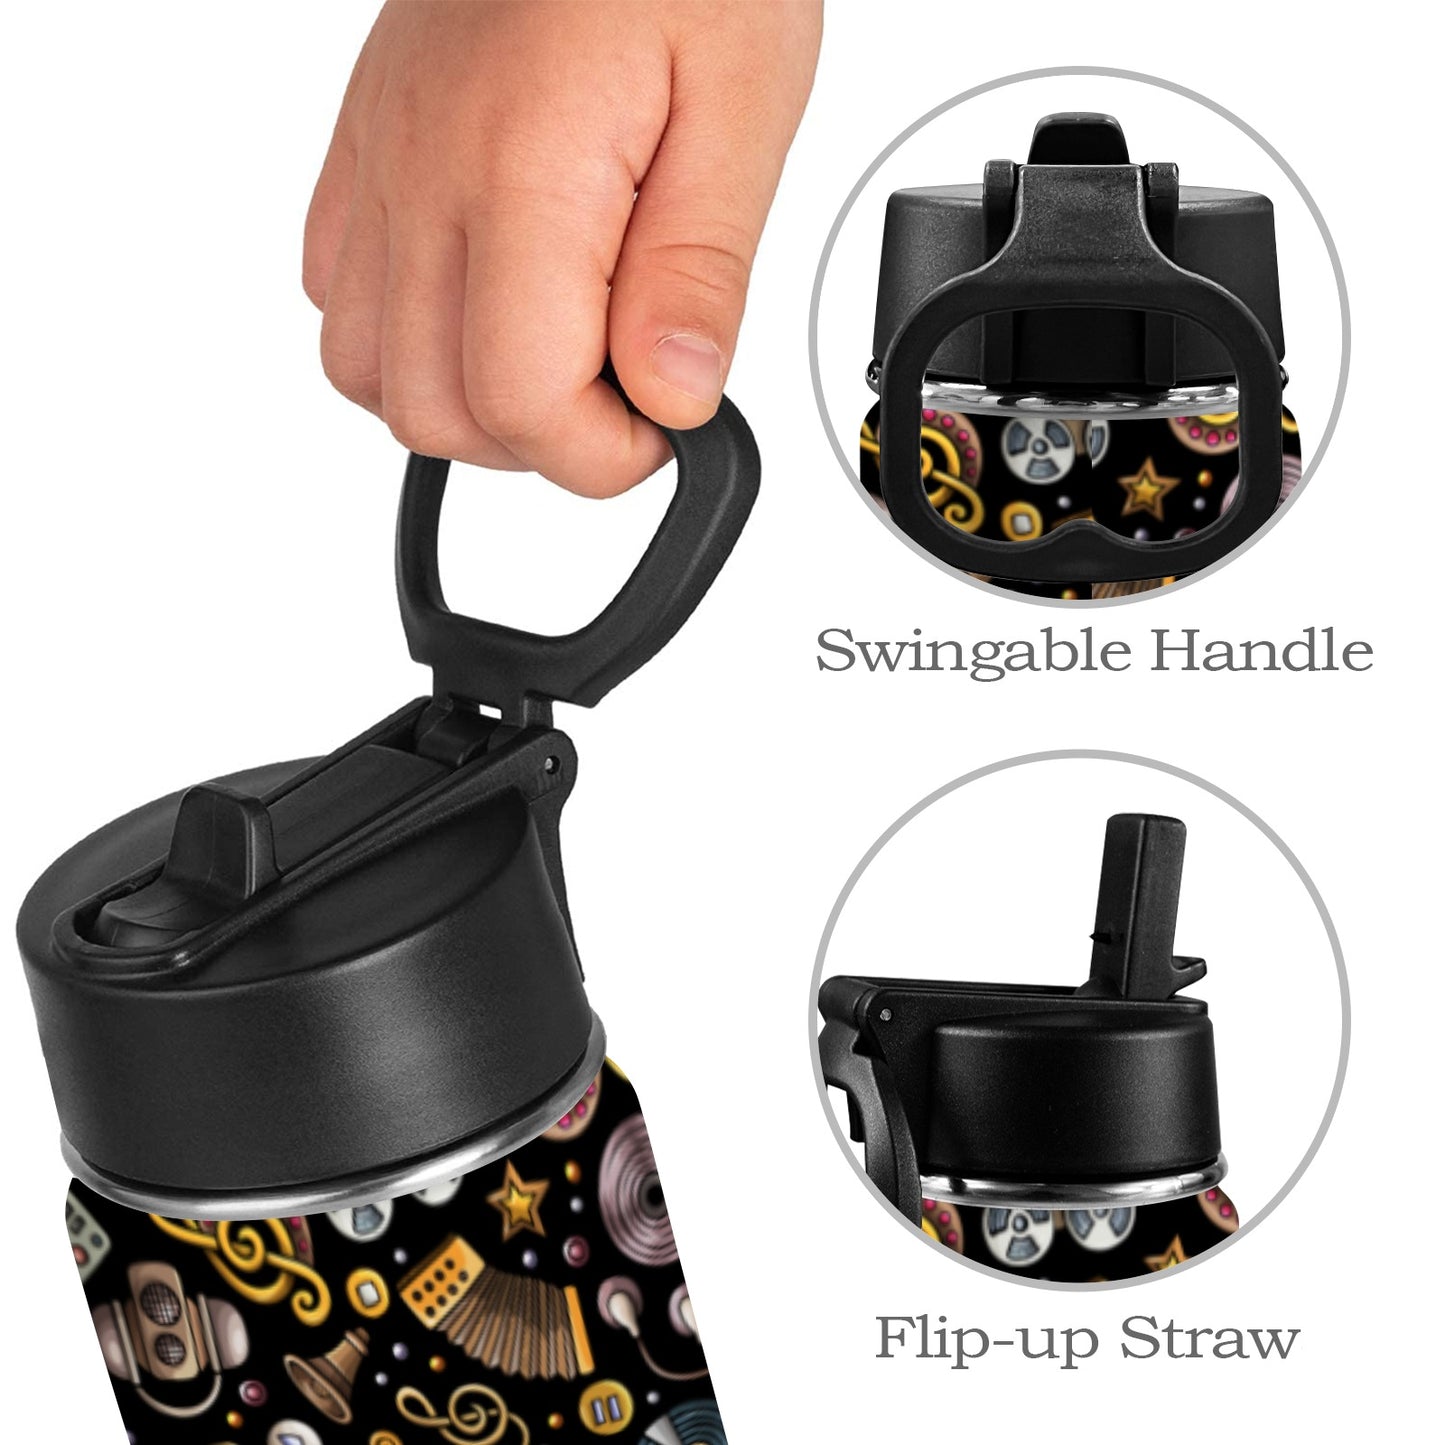 Retro Music Mix - Kids Water Bottle with Straw Lid (12 oz) Kids Water Bottle with Straw Lid Music